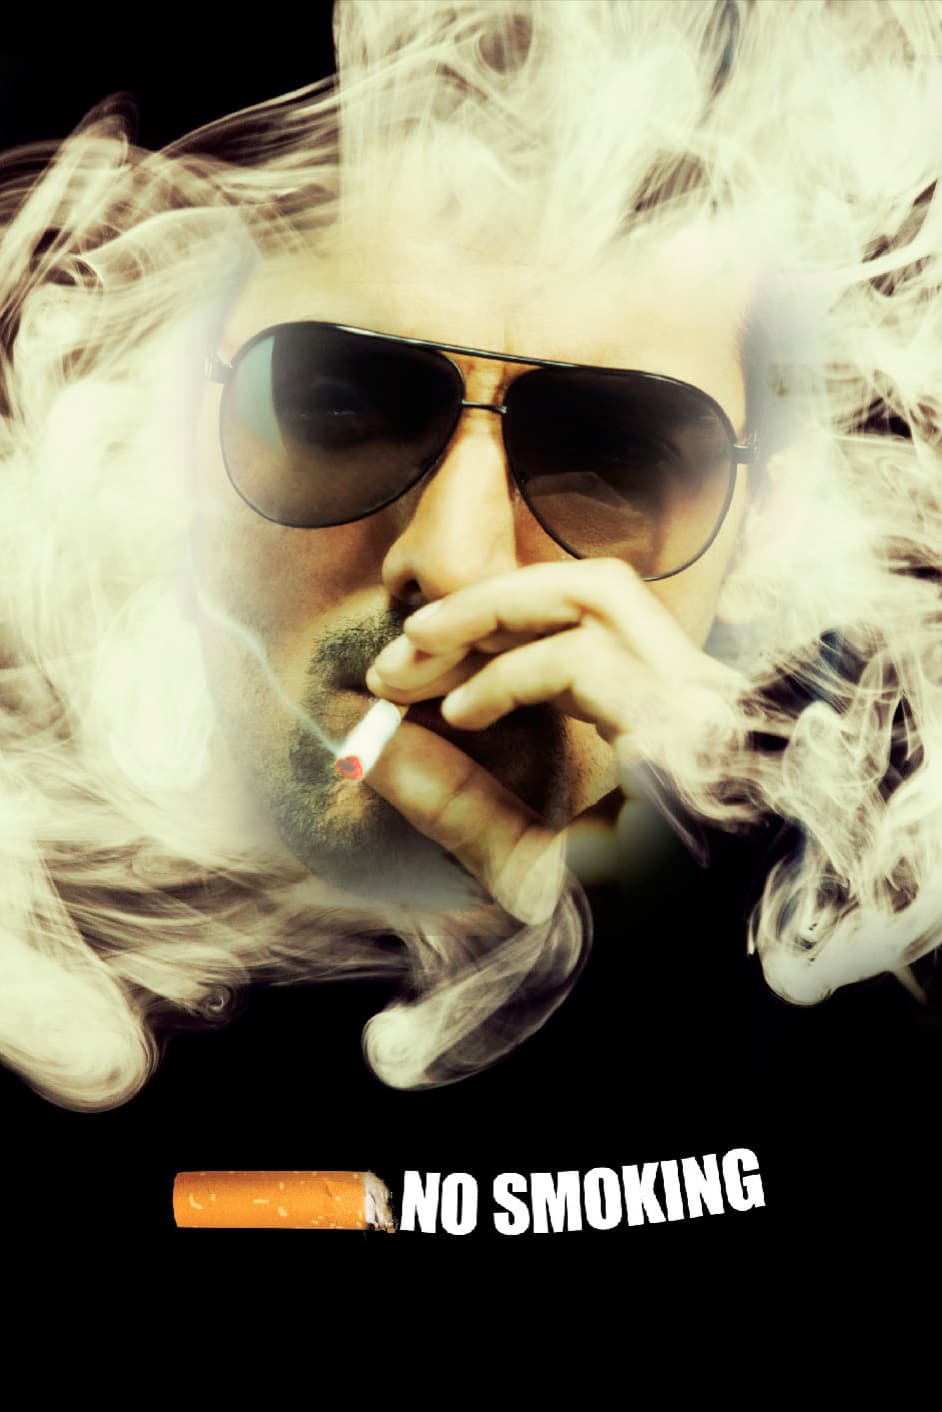 Poster for the movie "No Smoking"